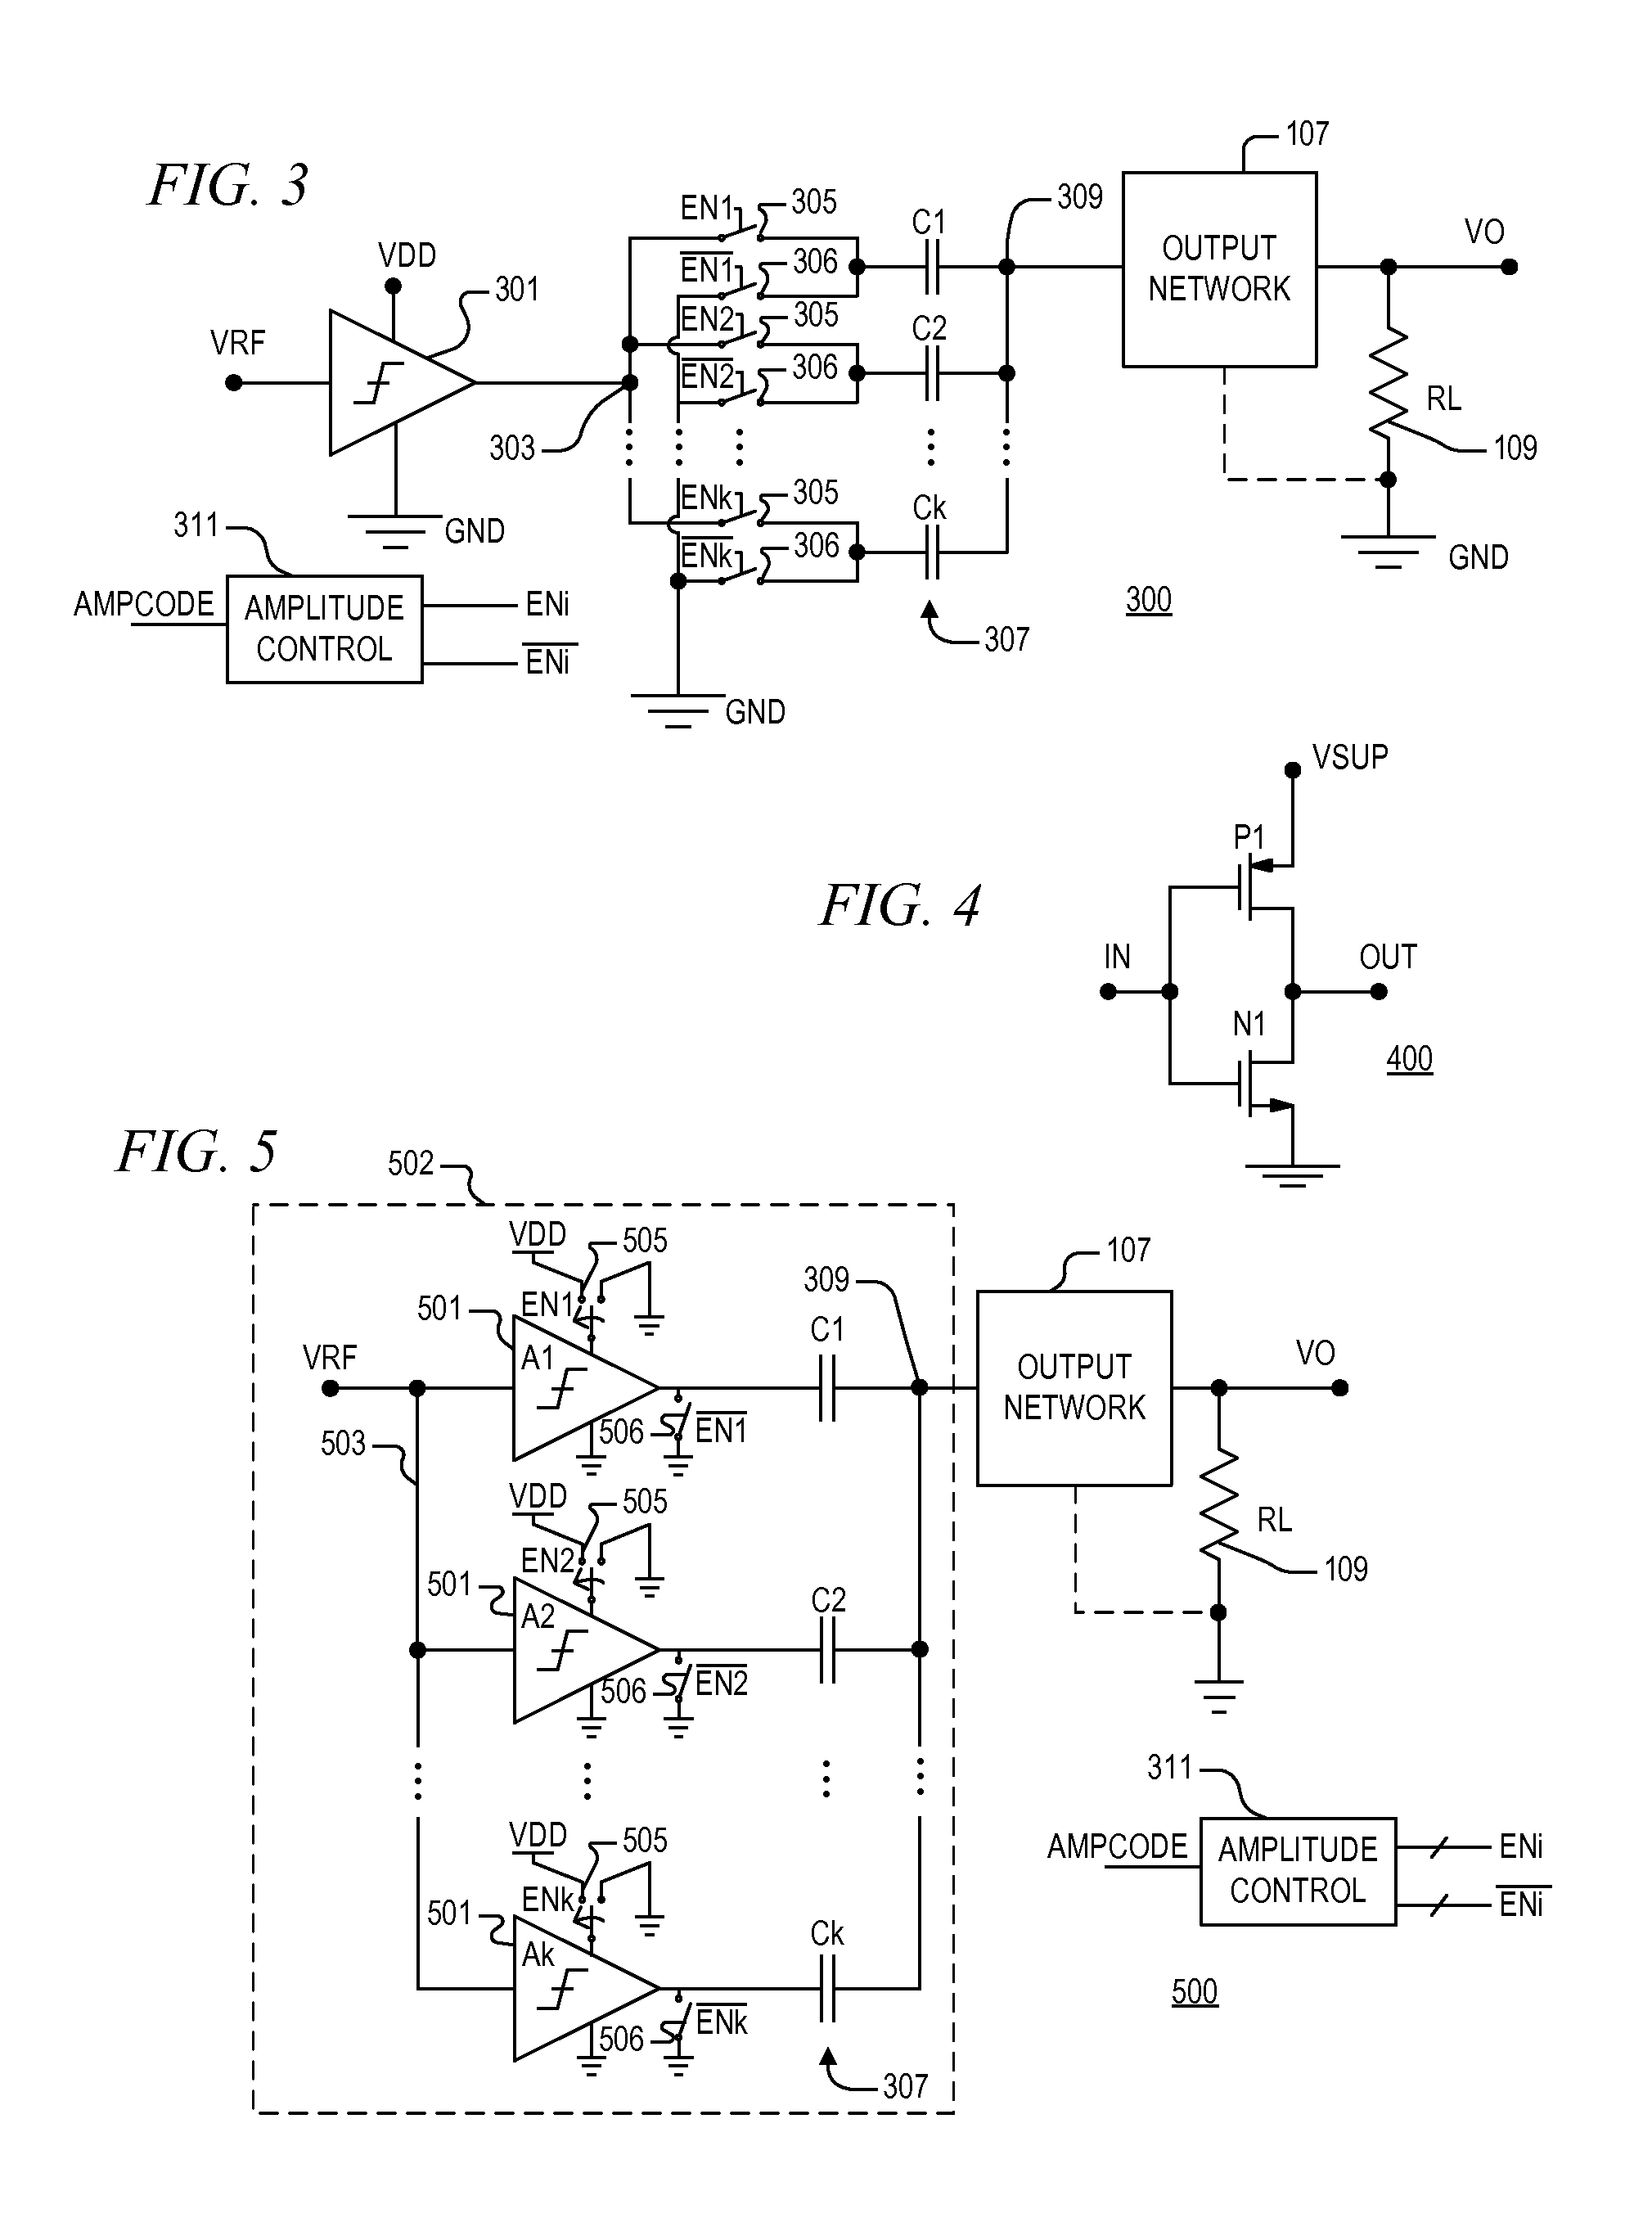 Amplitude control system and method for communication systems